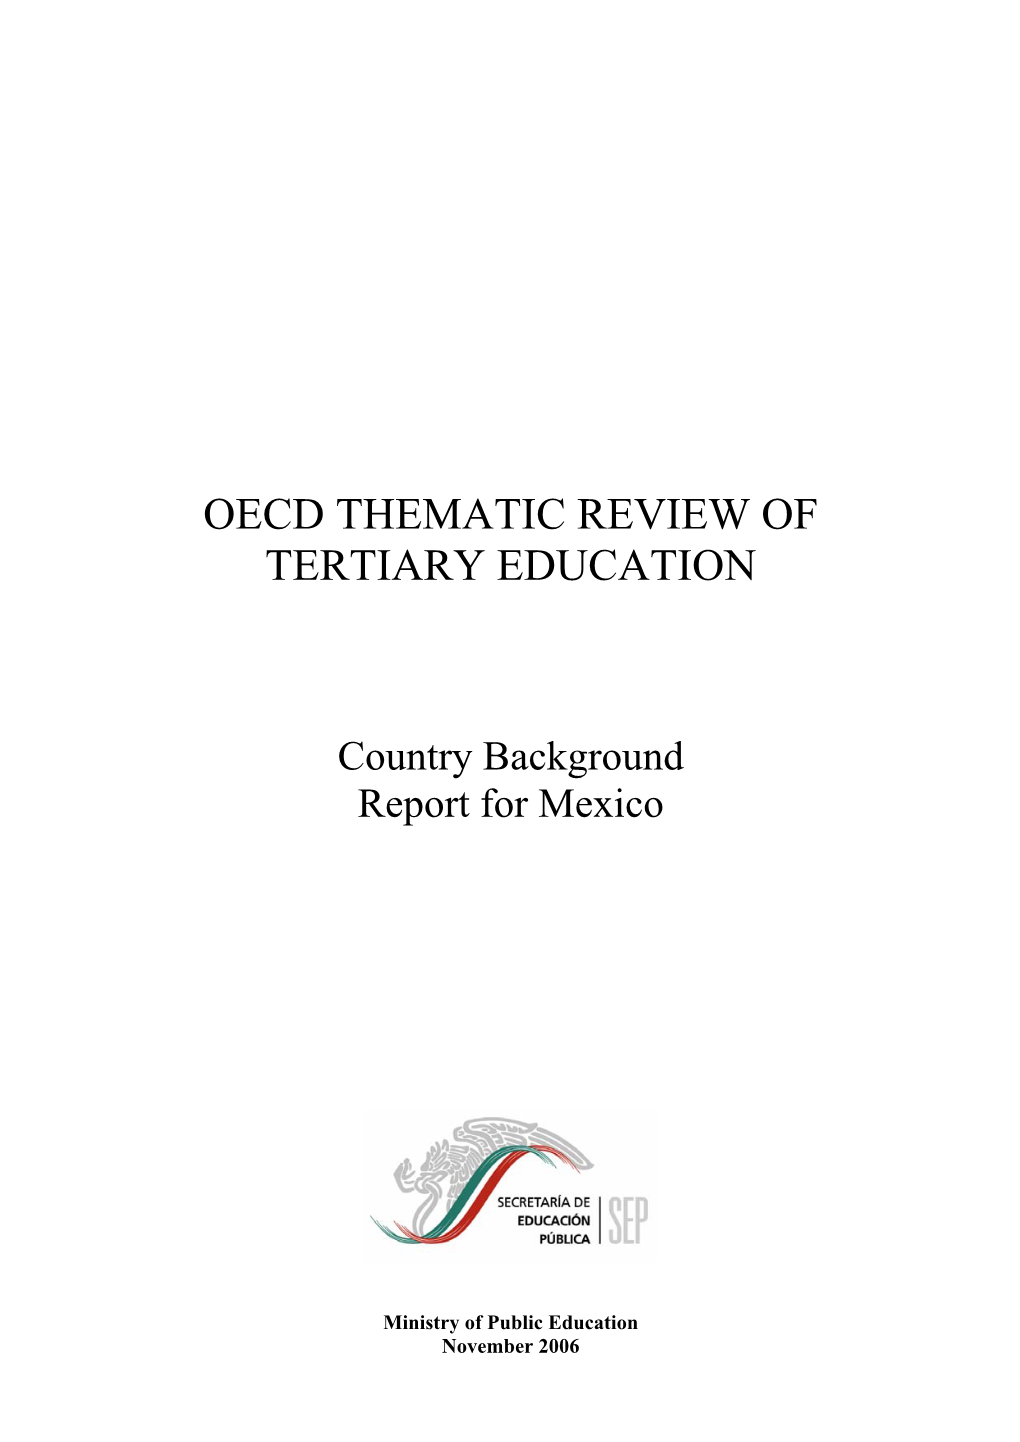 Oecd Thematic Review of Tertiary Education